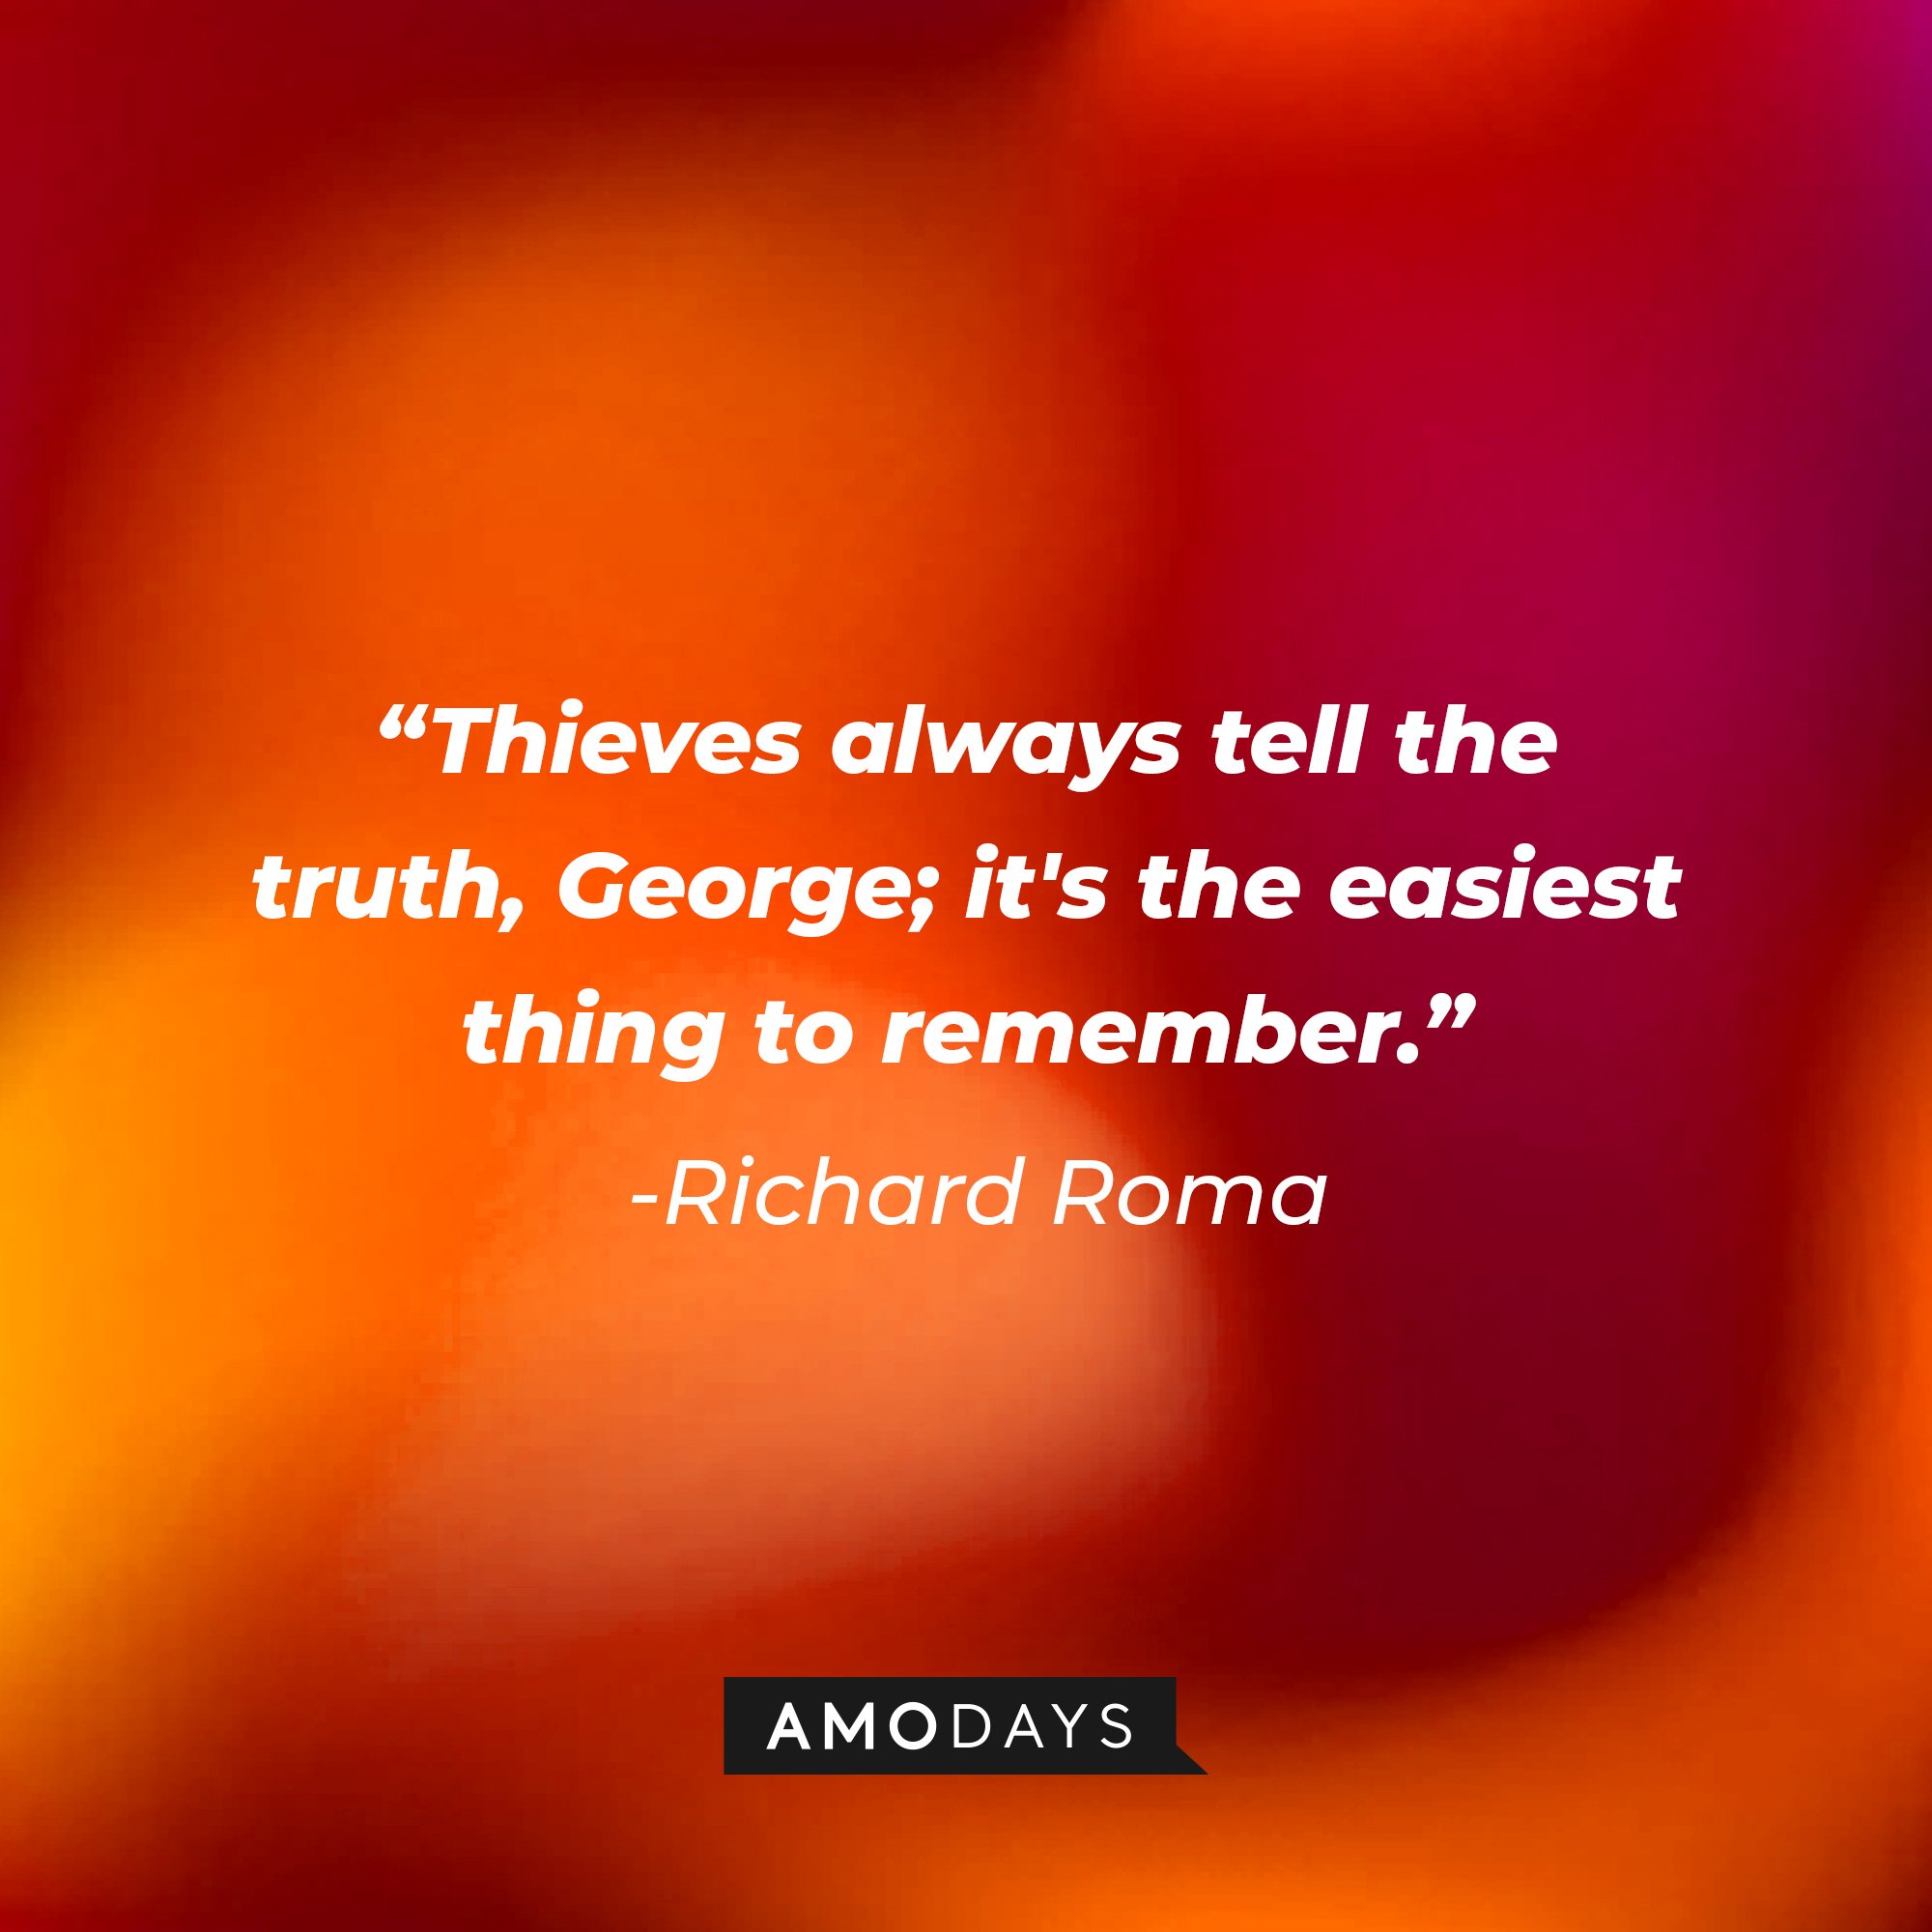 Richard Roma's quote: "Thieves always tell the truth, George; it's the easiest thing to remember." | Image: AmoDays